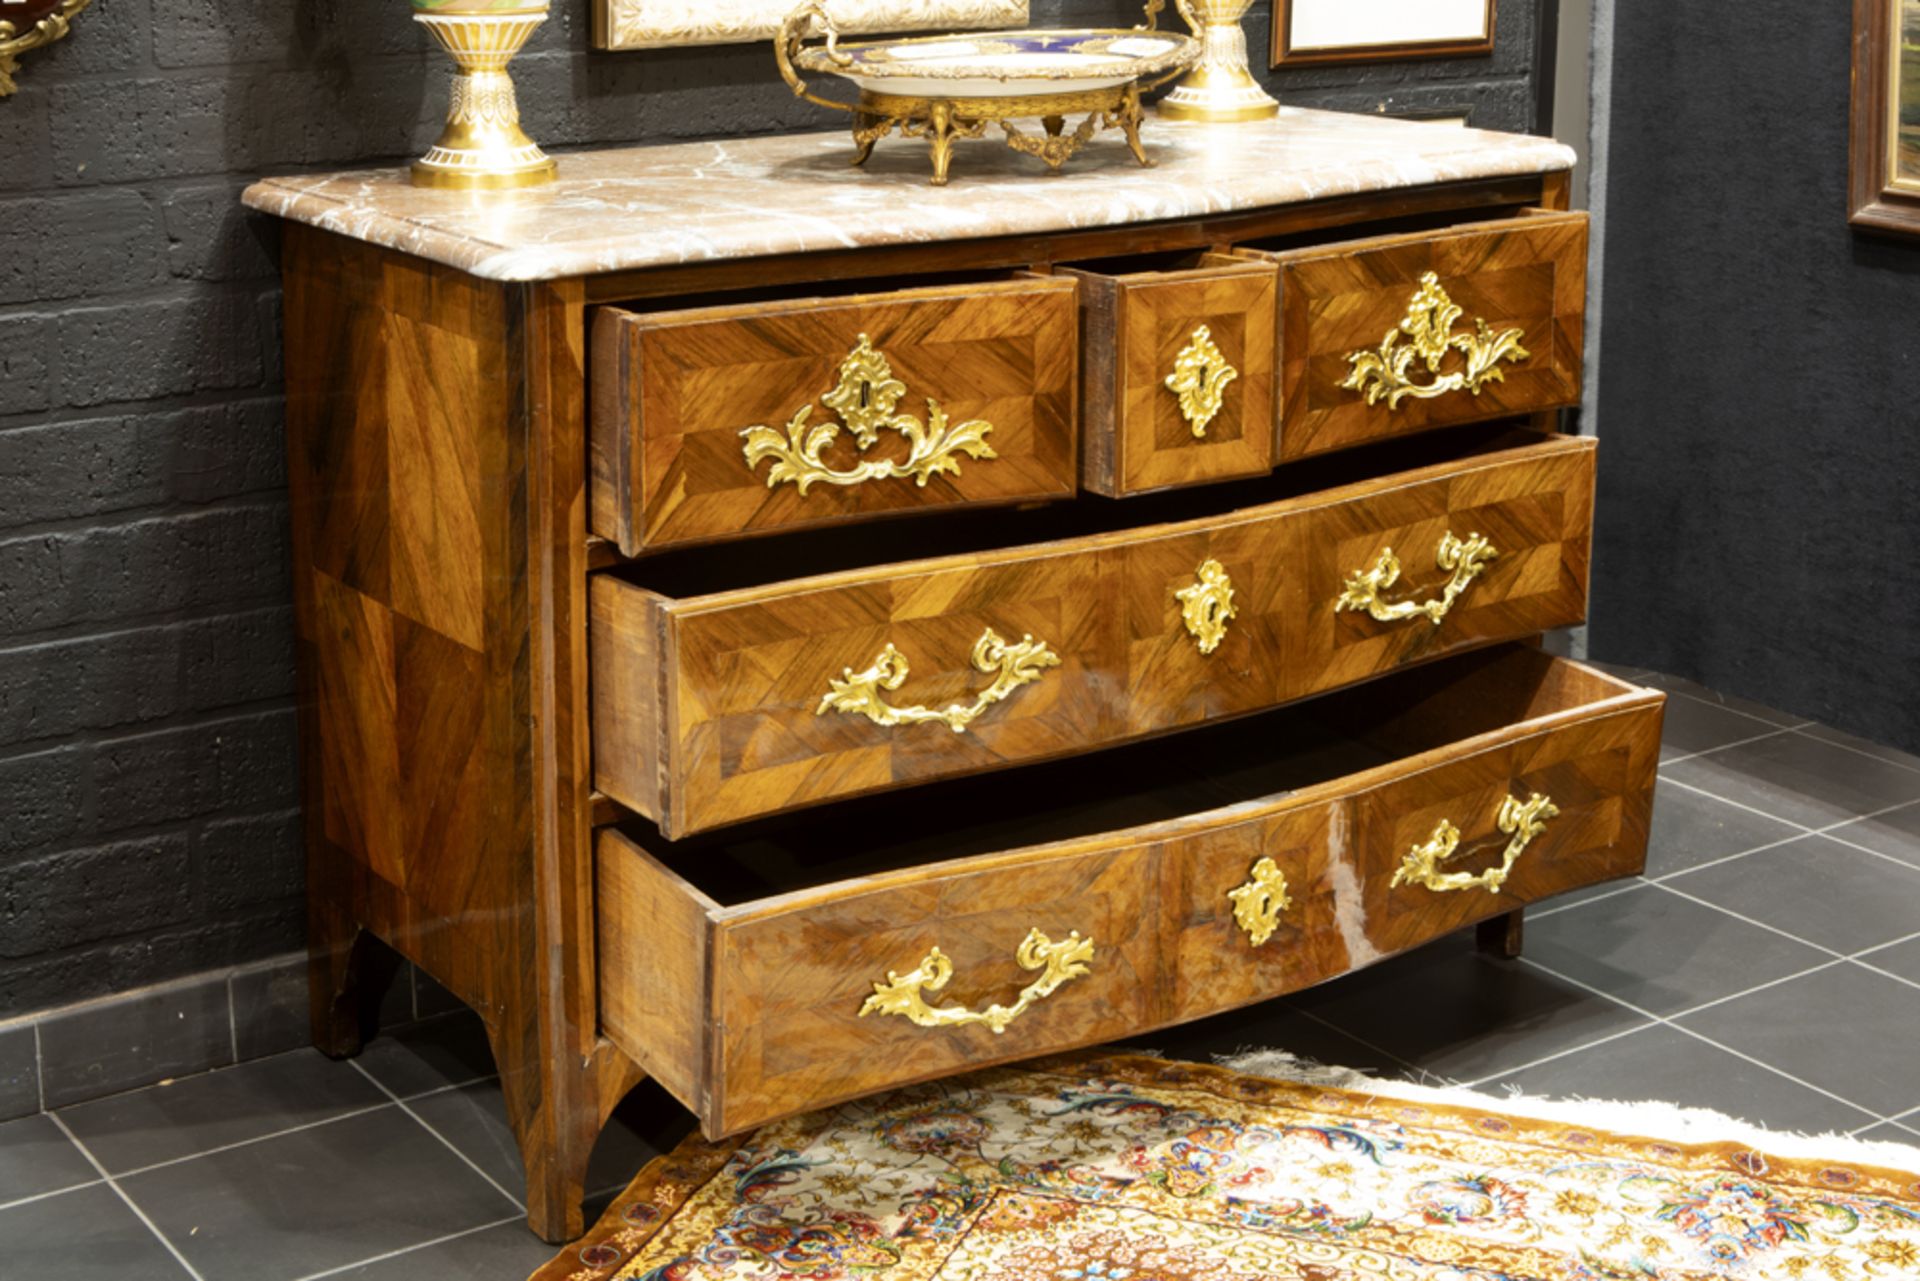 18th Cent. French Louis XV period chest of drawers in polished rose-wood with rich mountings in - Image 2 of 2